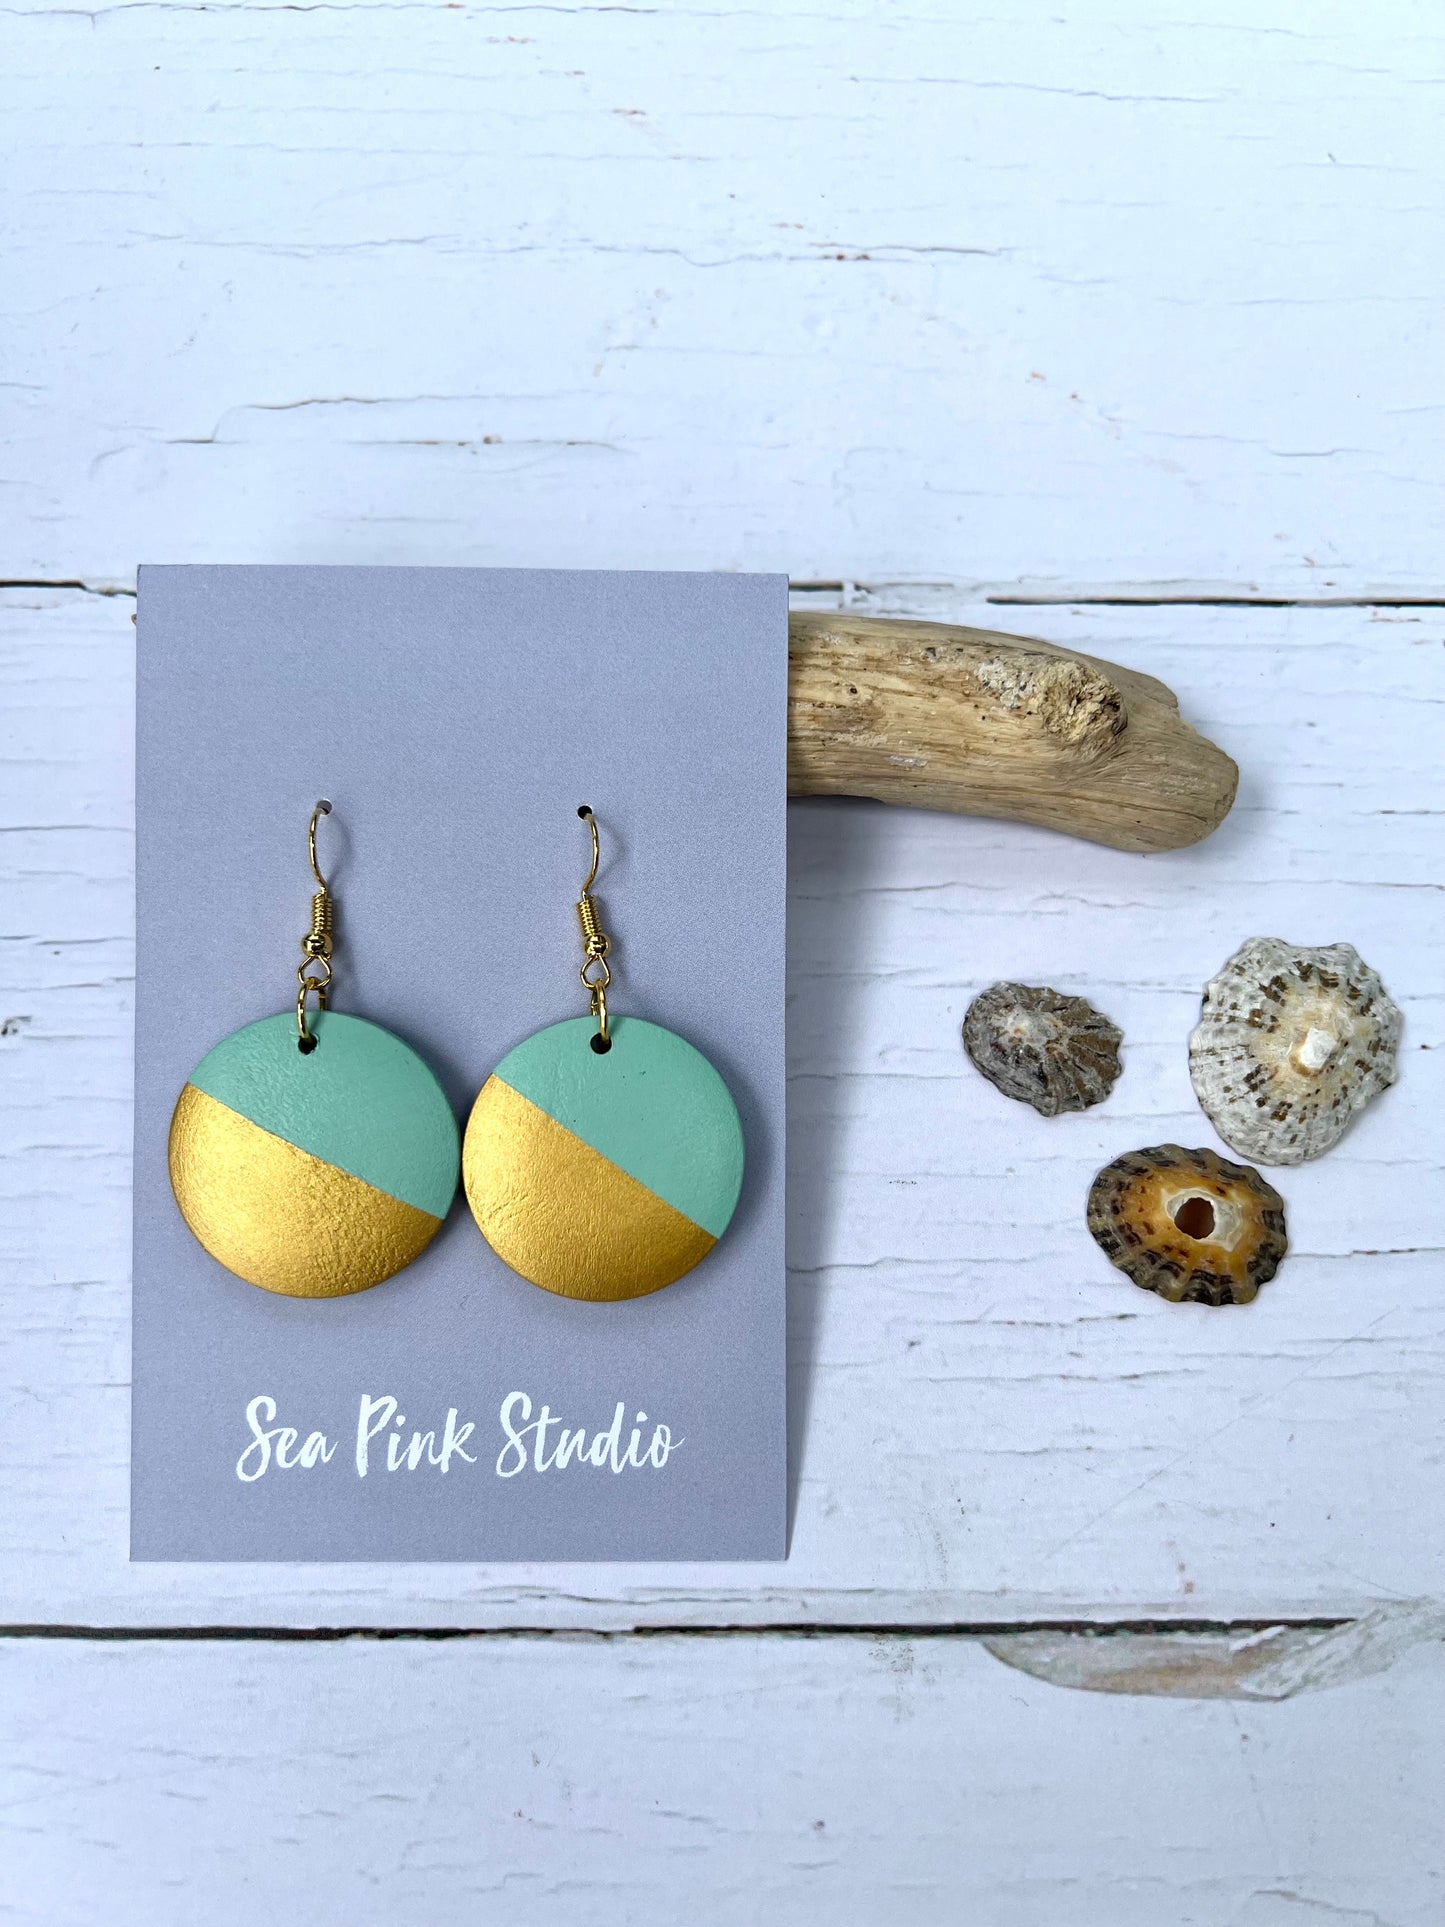 Handpainted mint and gold wooden bead earrings